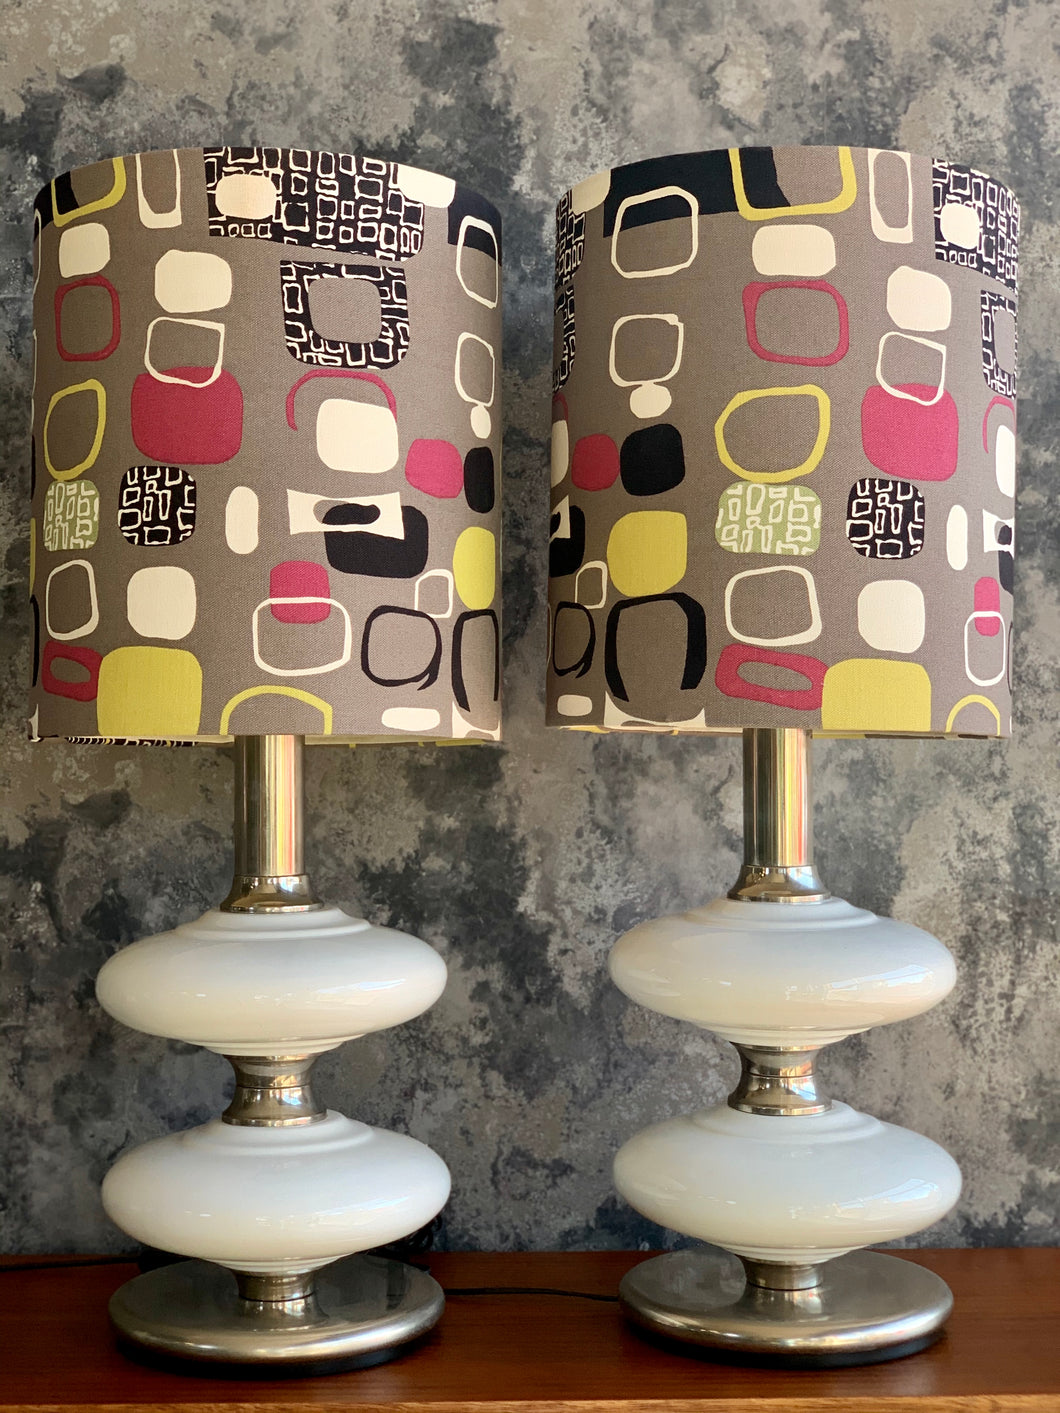 Pair of white & chrome lamps